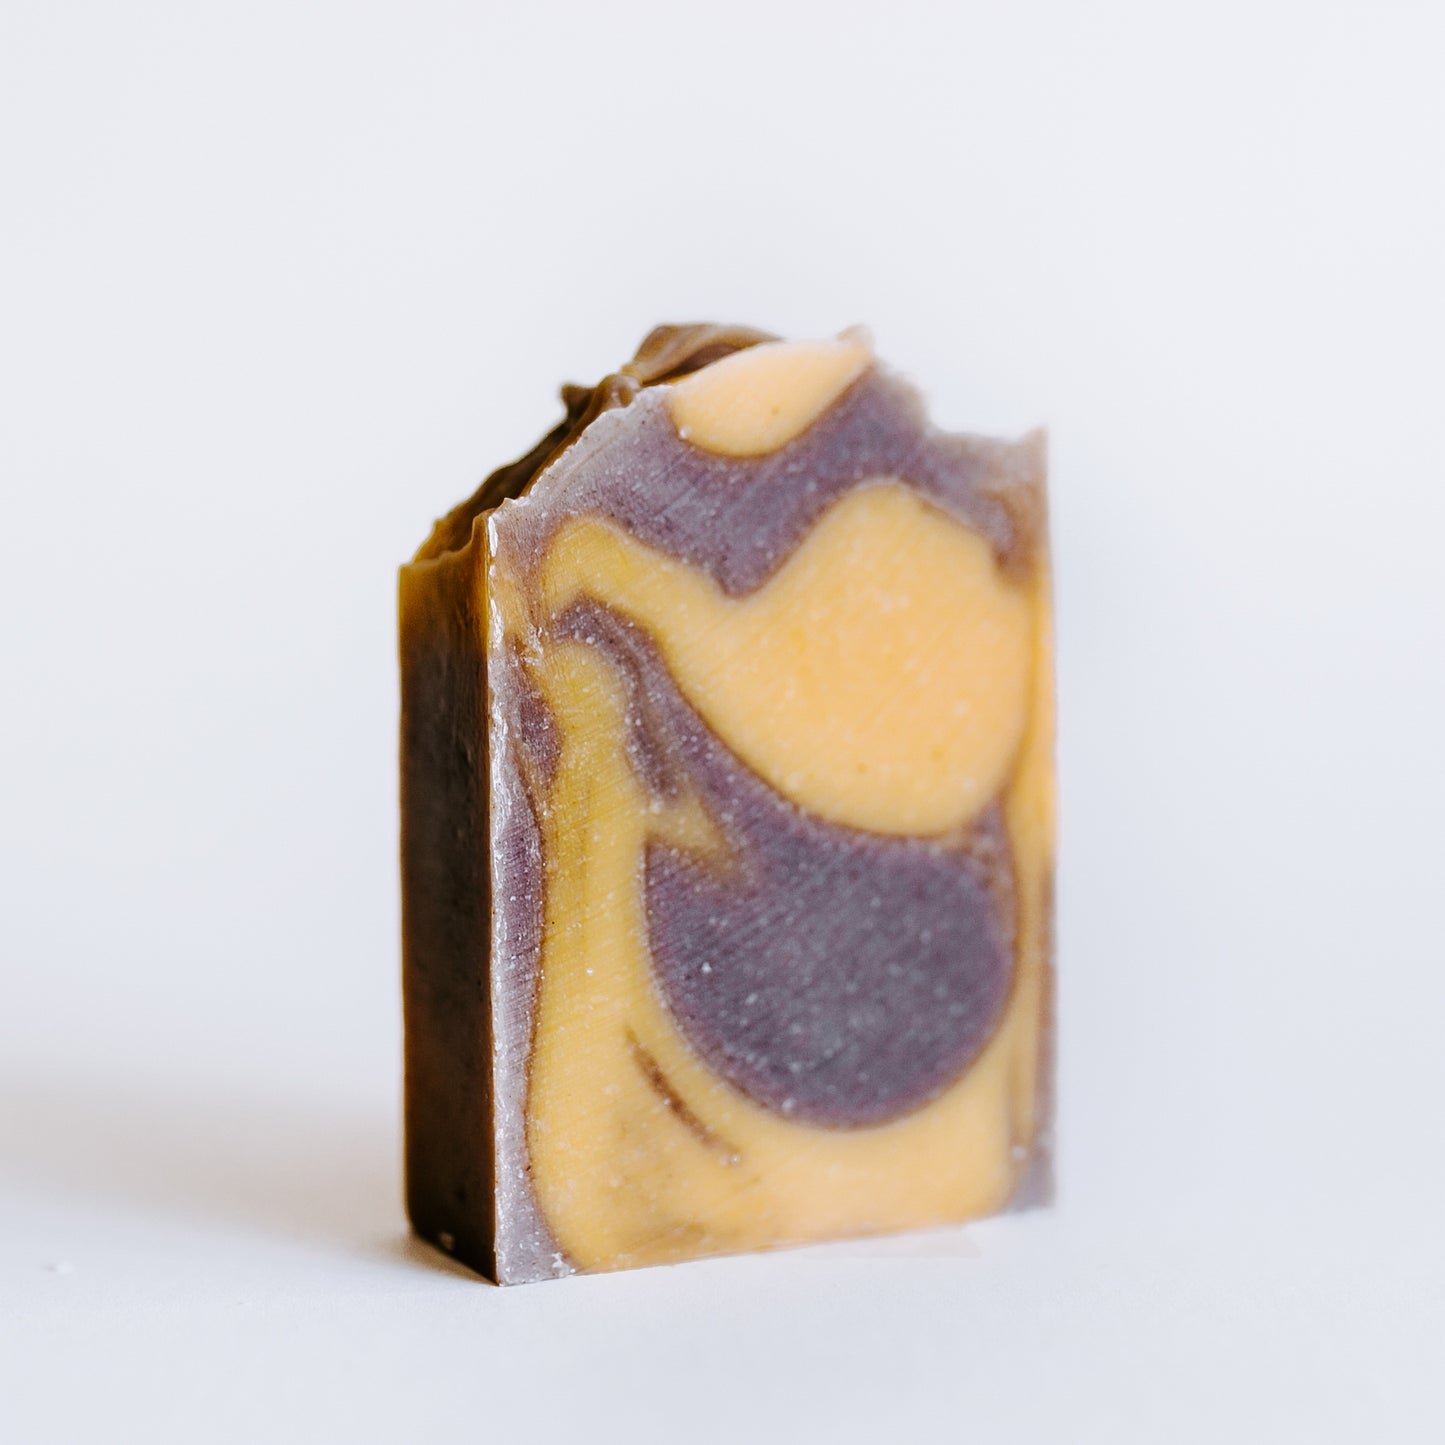 serenity now soap bar